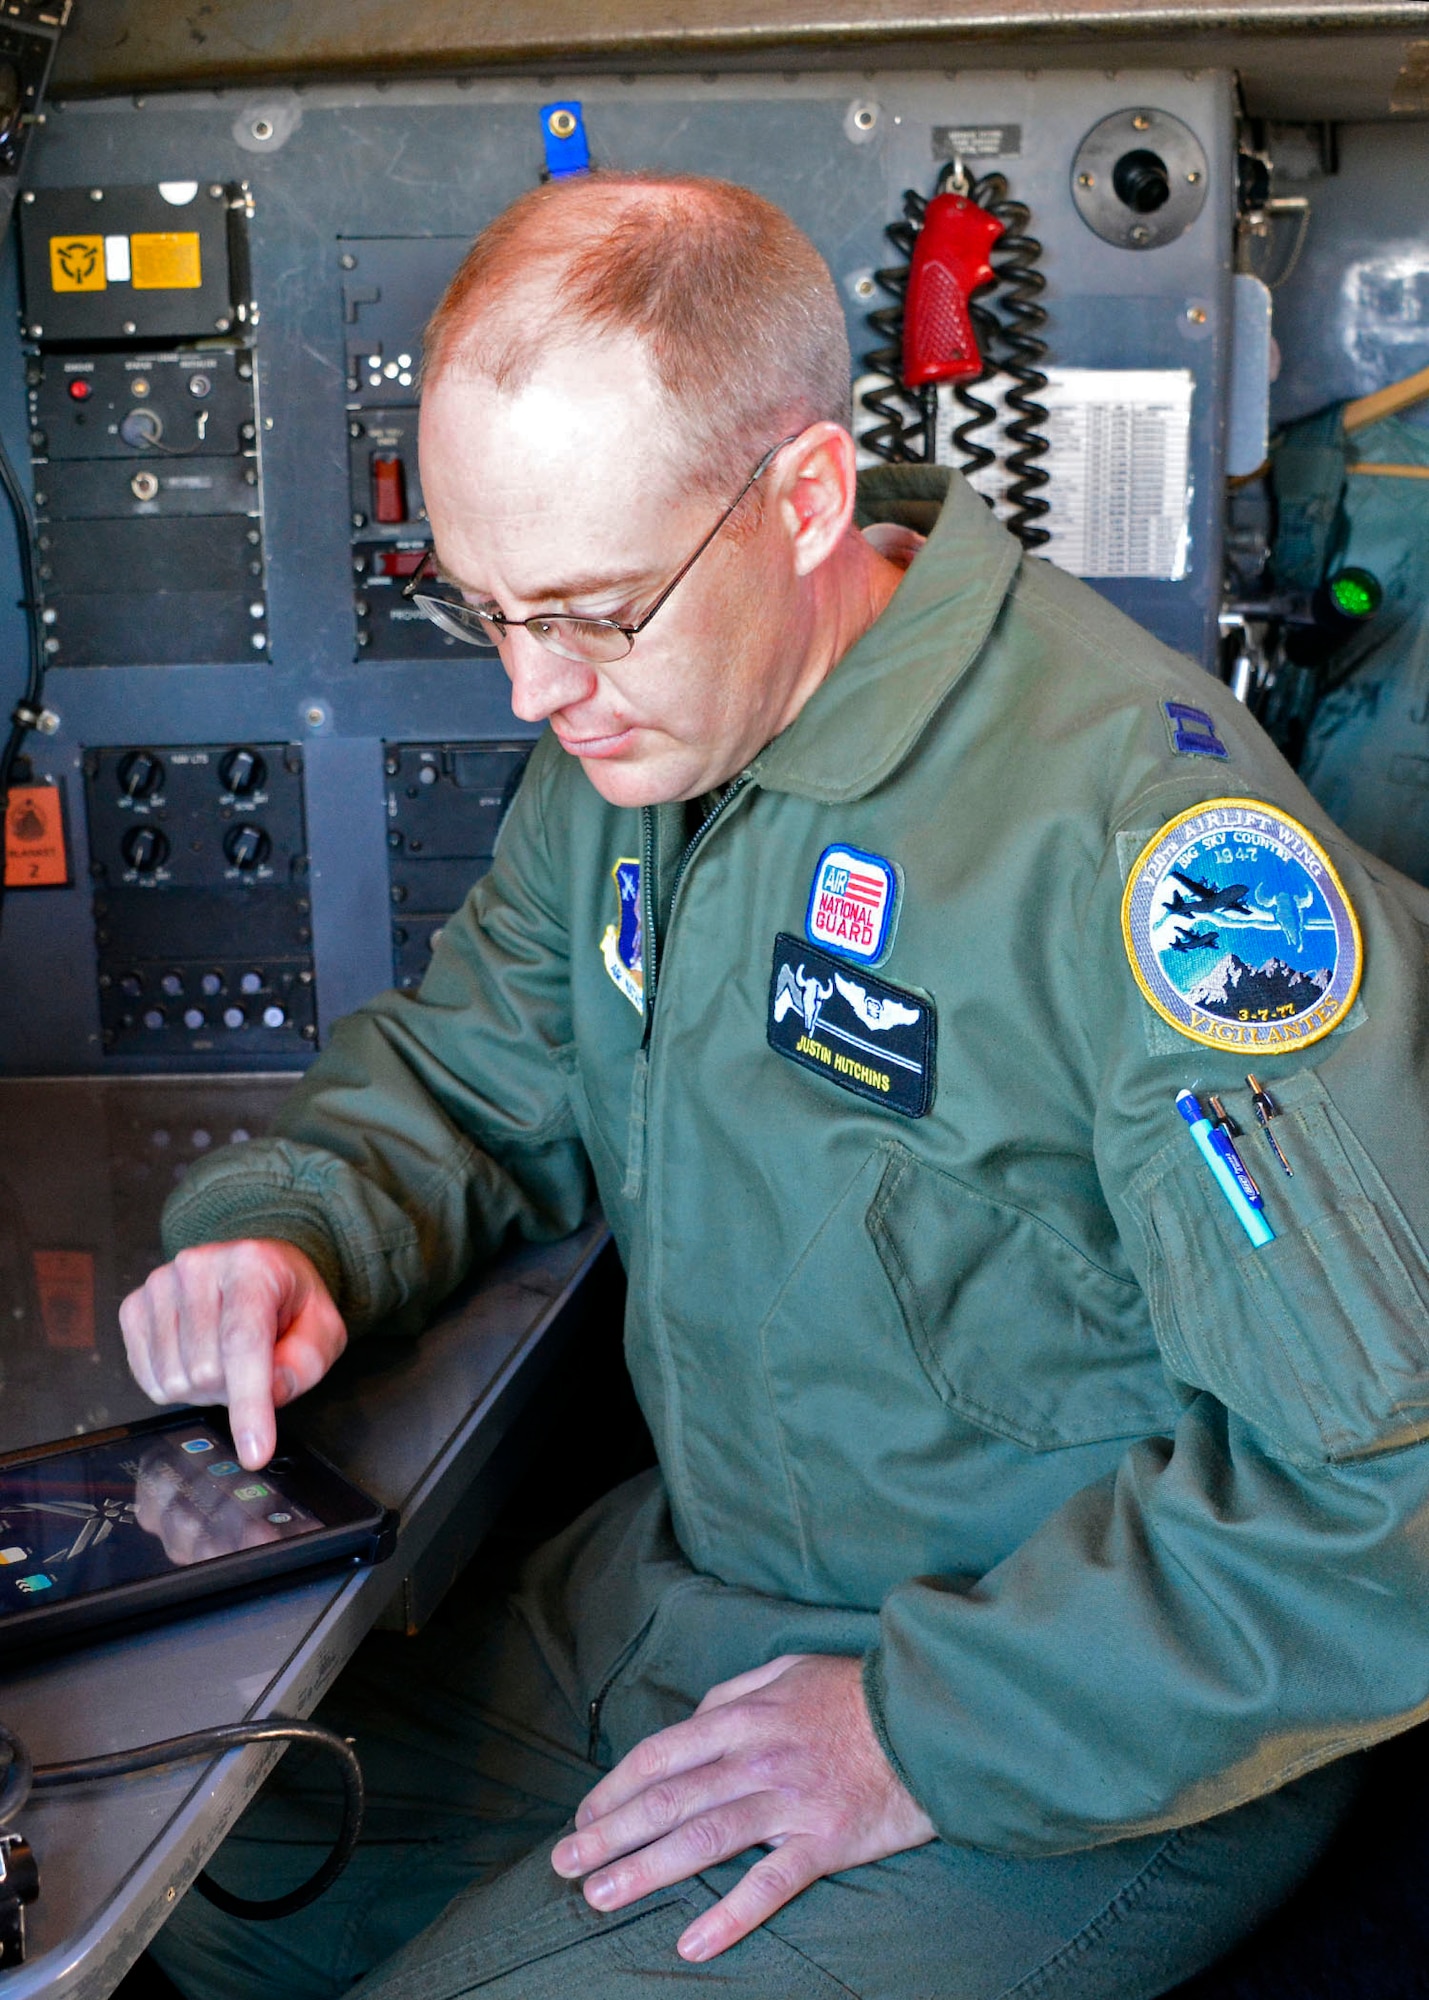 120th Airlift Wing Navigator Capt. Justin Hutchins works out a navigation problem during navigator training conducted in a C-130 Hercules transport aircraft parked on the 120th AW ramp in Great Falls, Mont. Sept. 15, 2016. (U.S. Air National Guard photo by Senior Master Sgt. Eric Peterson)